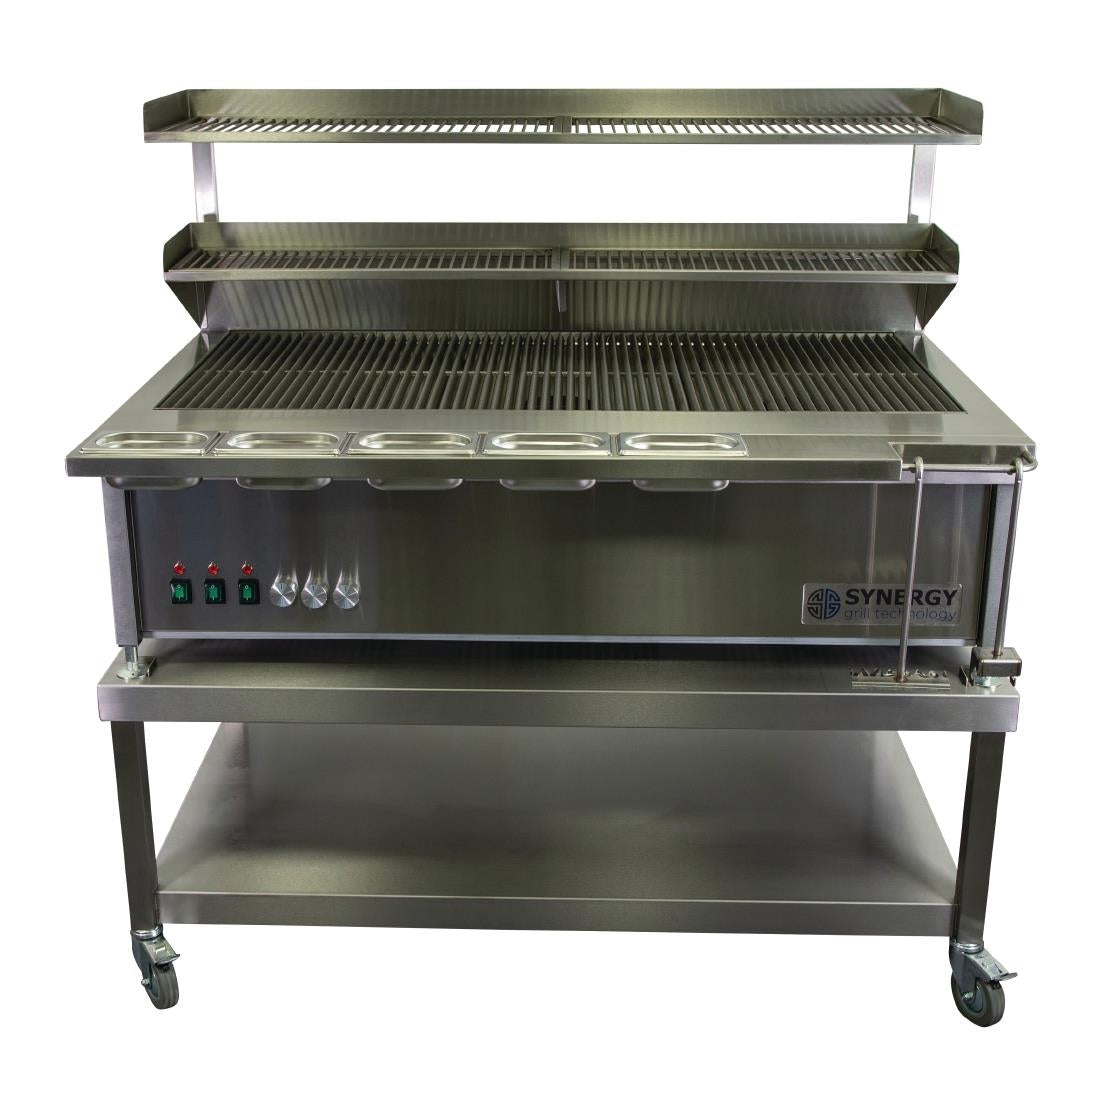 FD493 Synergy ST1300 Grill with Garnish Rail & Slow Cook Shelf